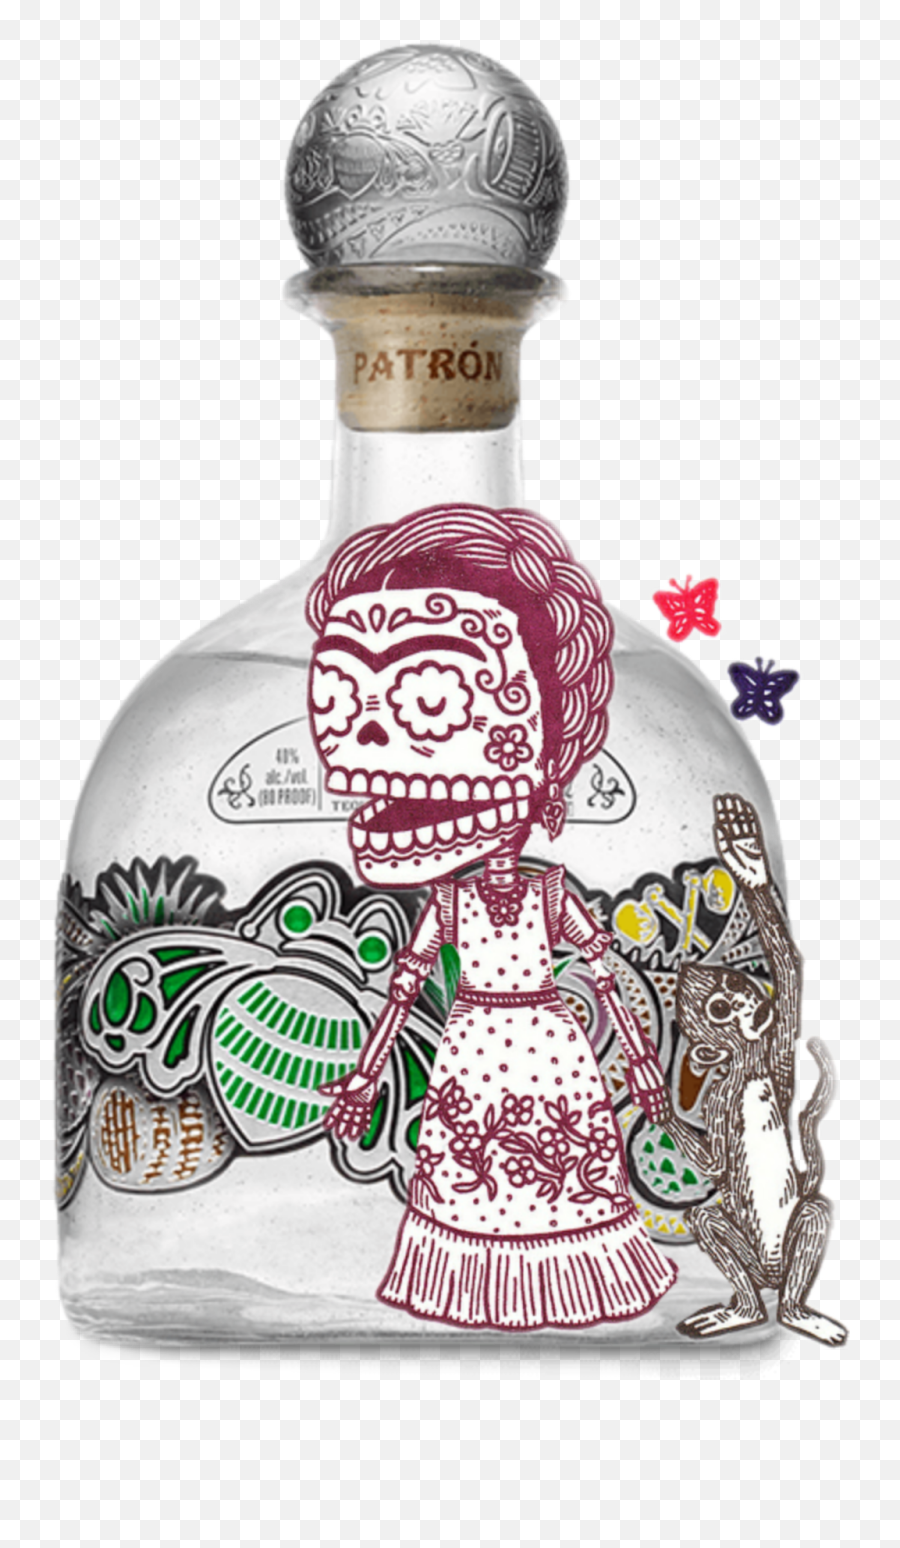 Limited Edition Patron Silver - Patron Limited Edition 2019 Emoji,Patron Bottle Png